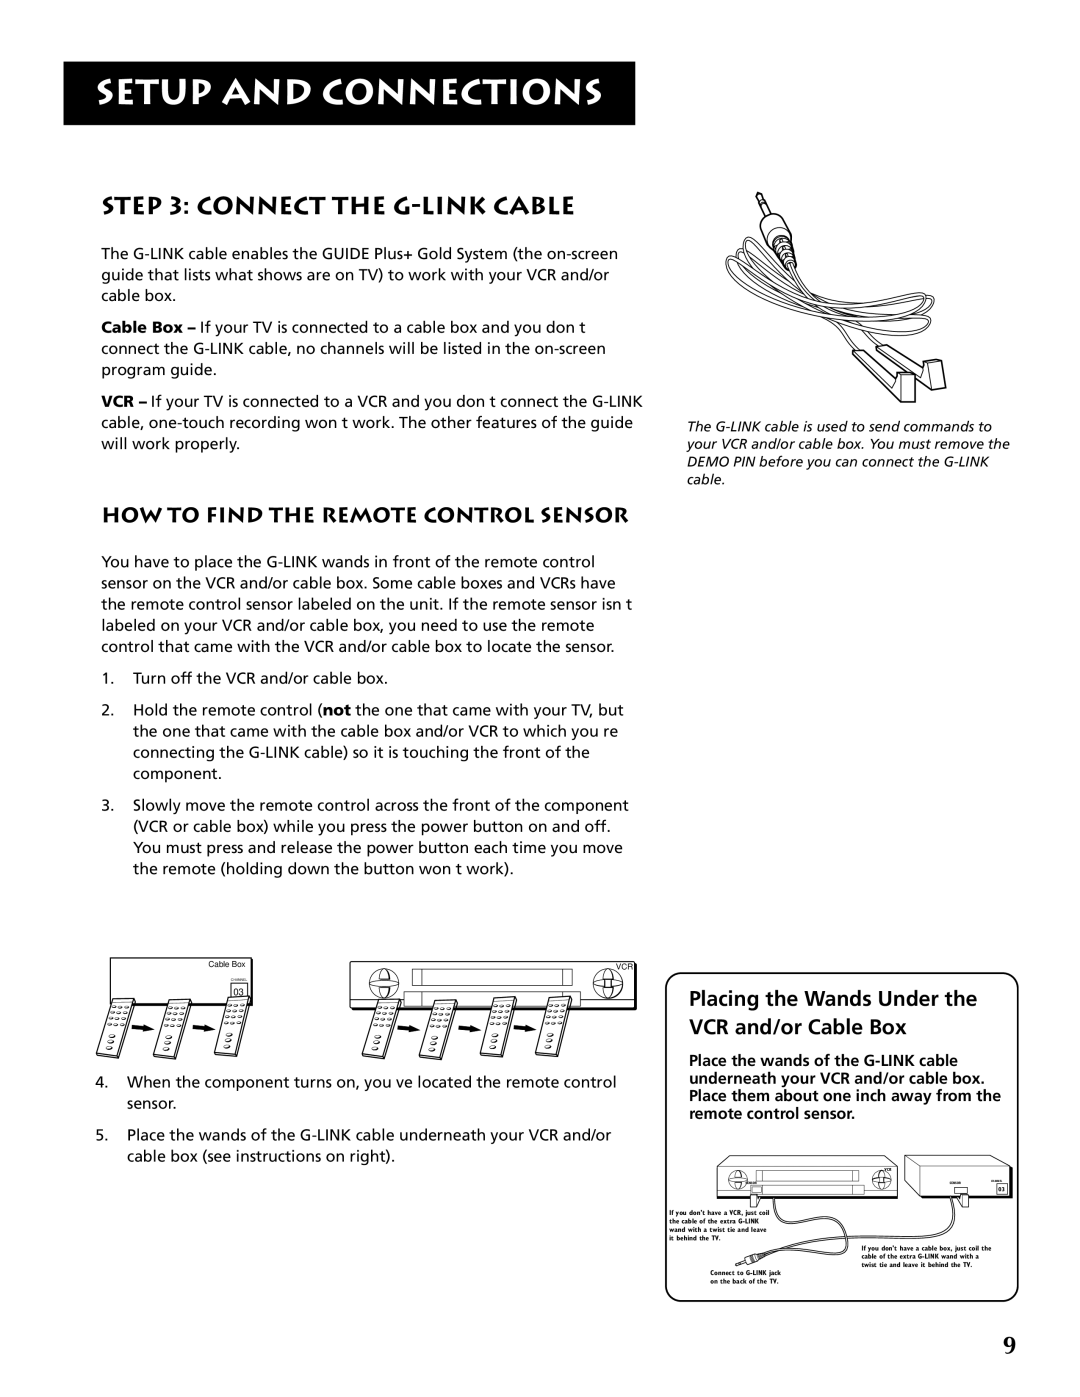 RCA F32691 manual Connect The G-Link Cable, How To Find The Remote Control Sensor, Setup And Connections 